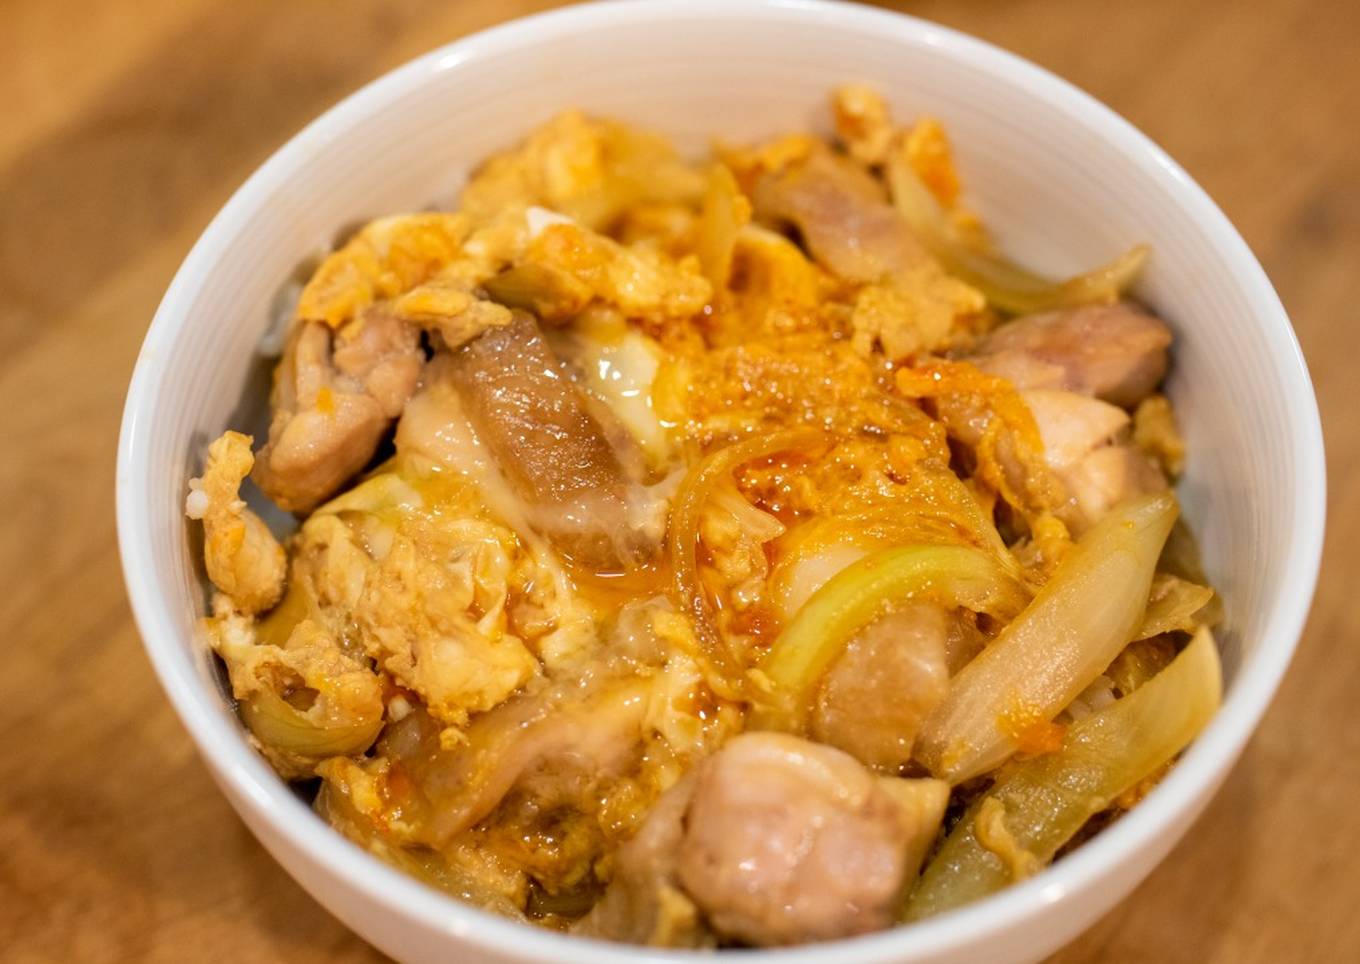 Oyako-don: Japanese style chicken and egg bowl